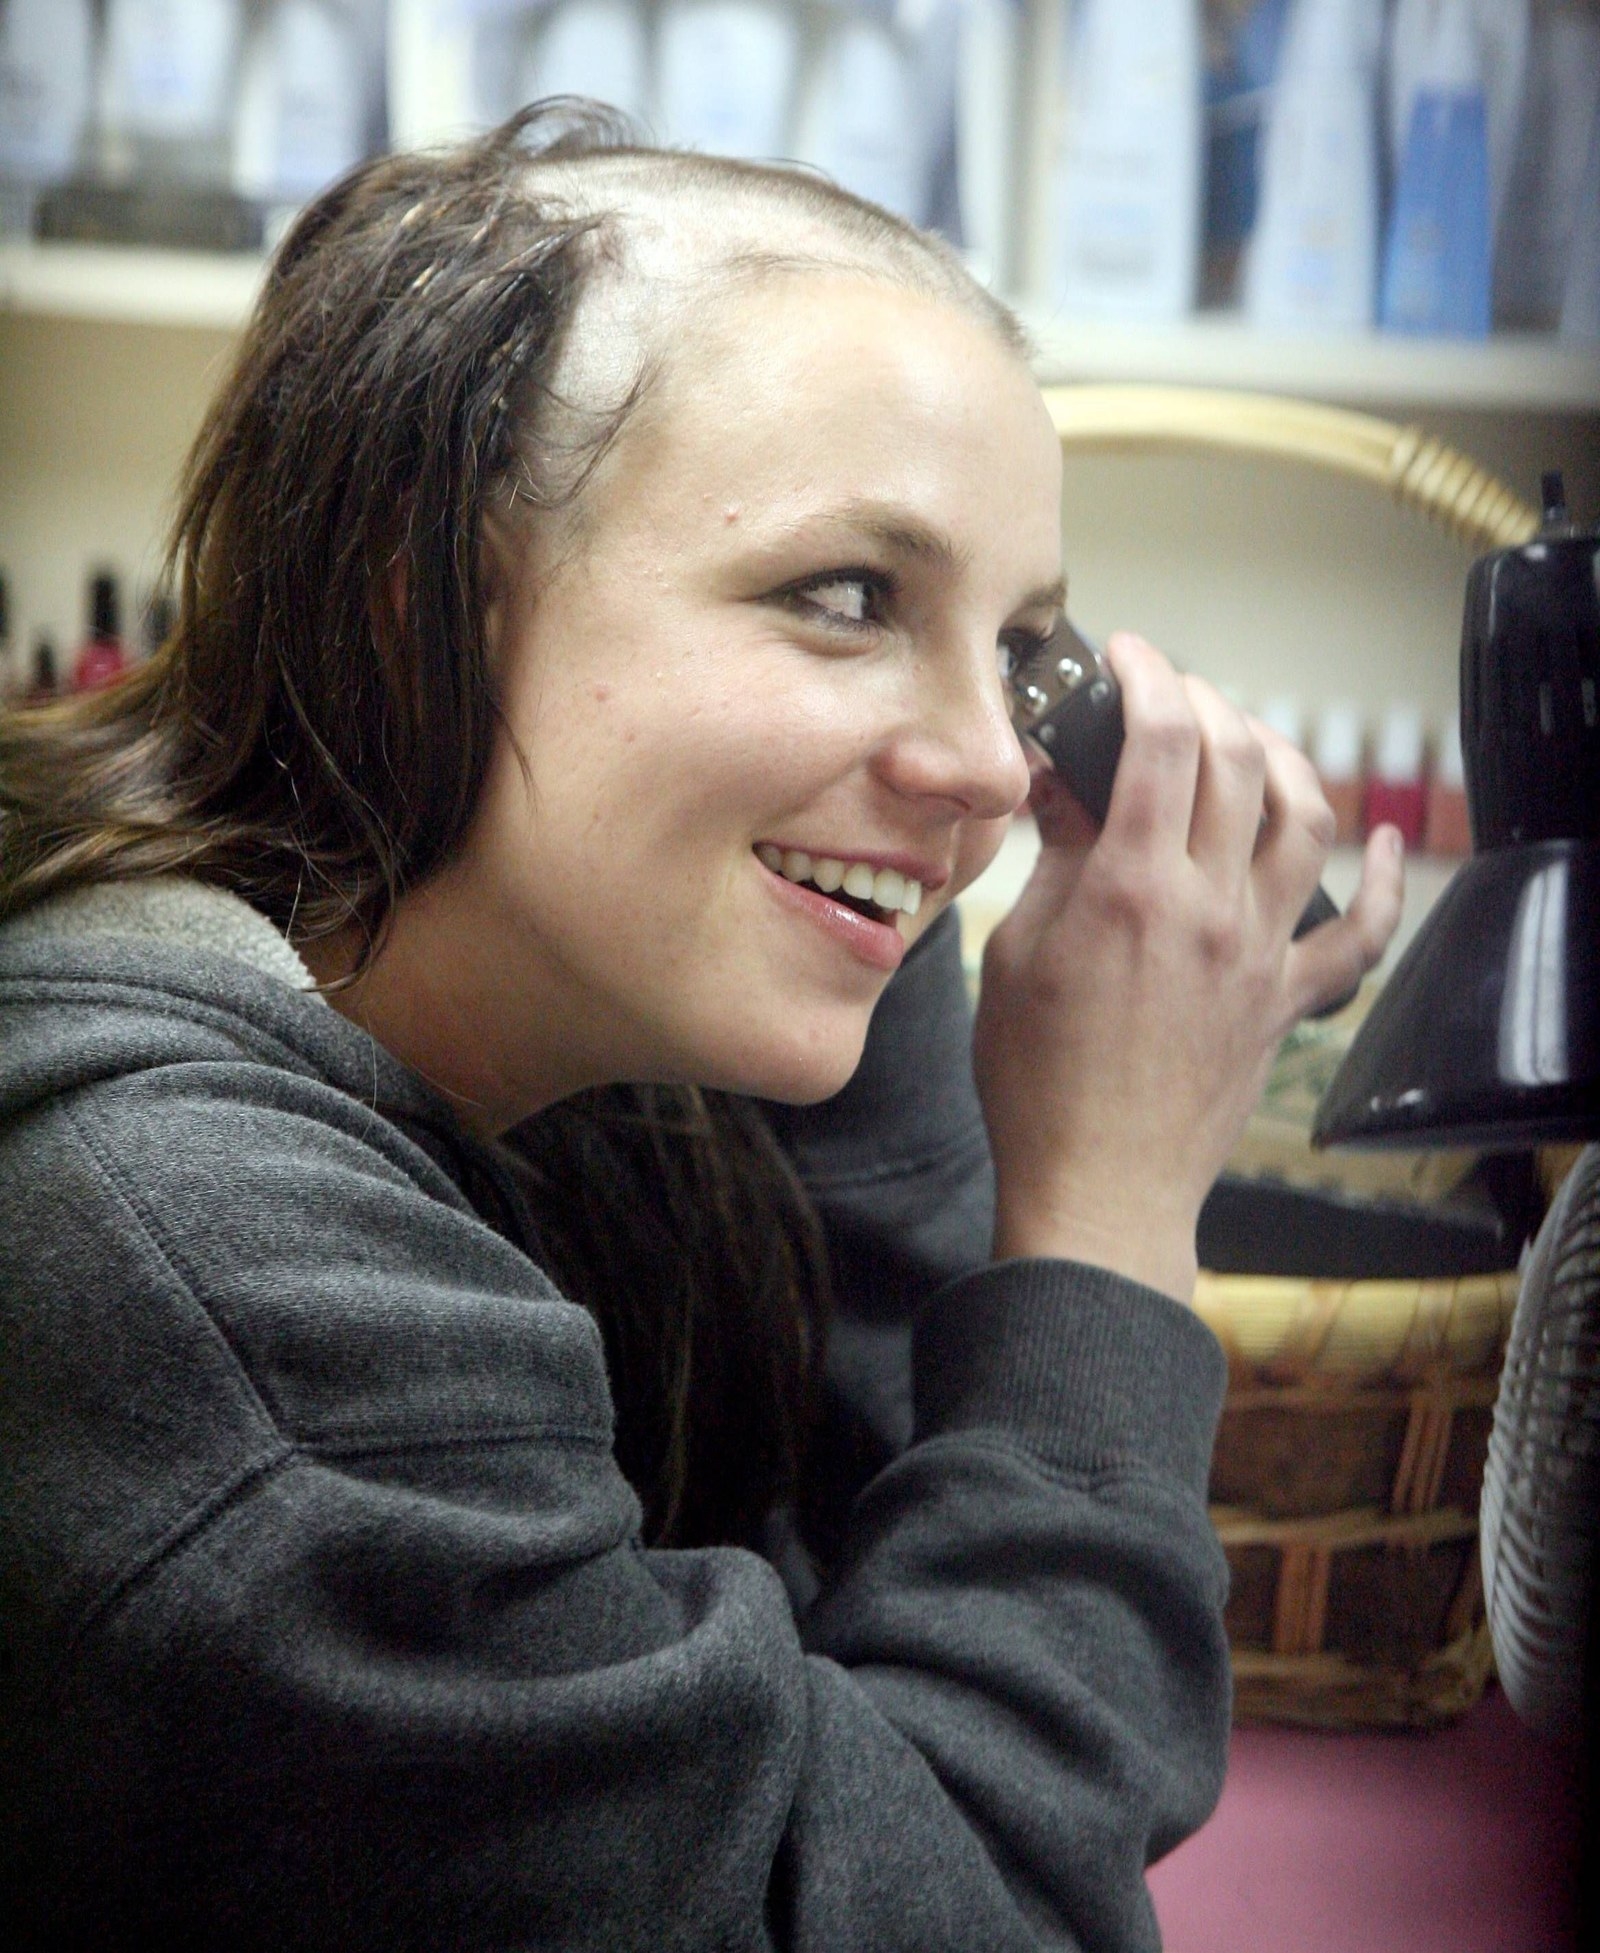 19. When Britney Spears shaved her head, an Us reporter rushed to the scene...